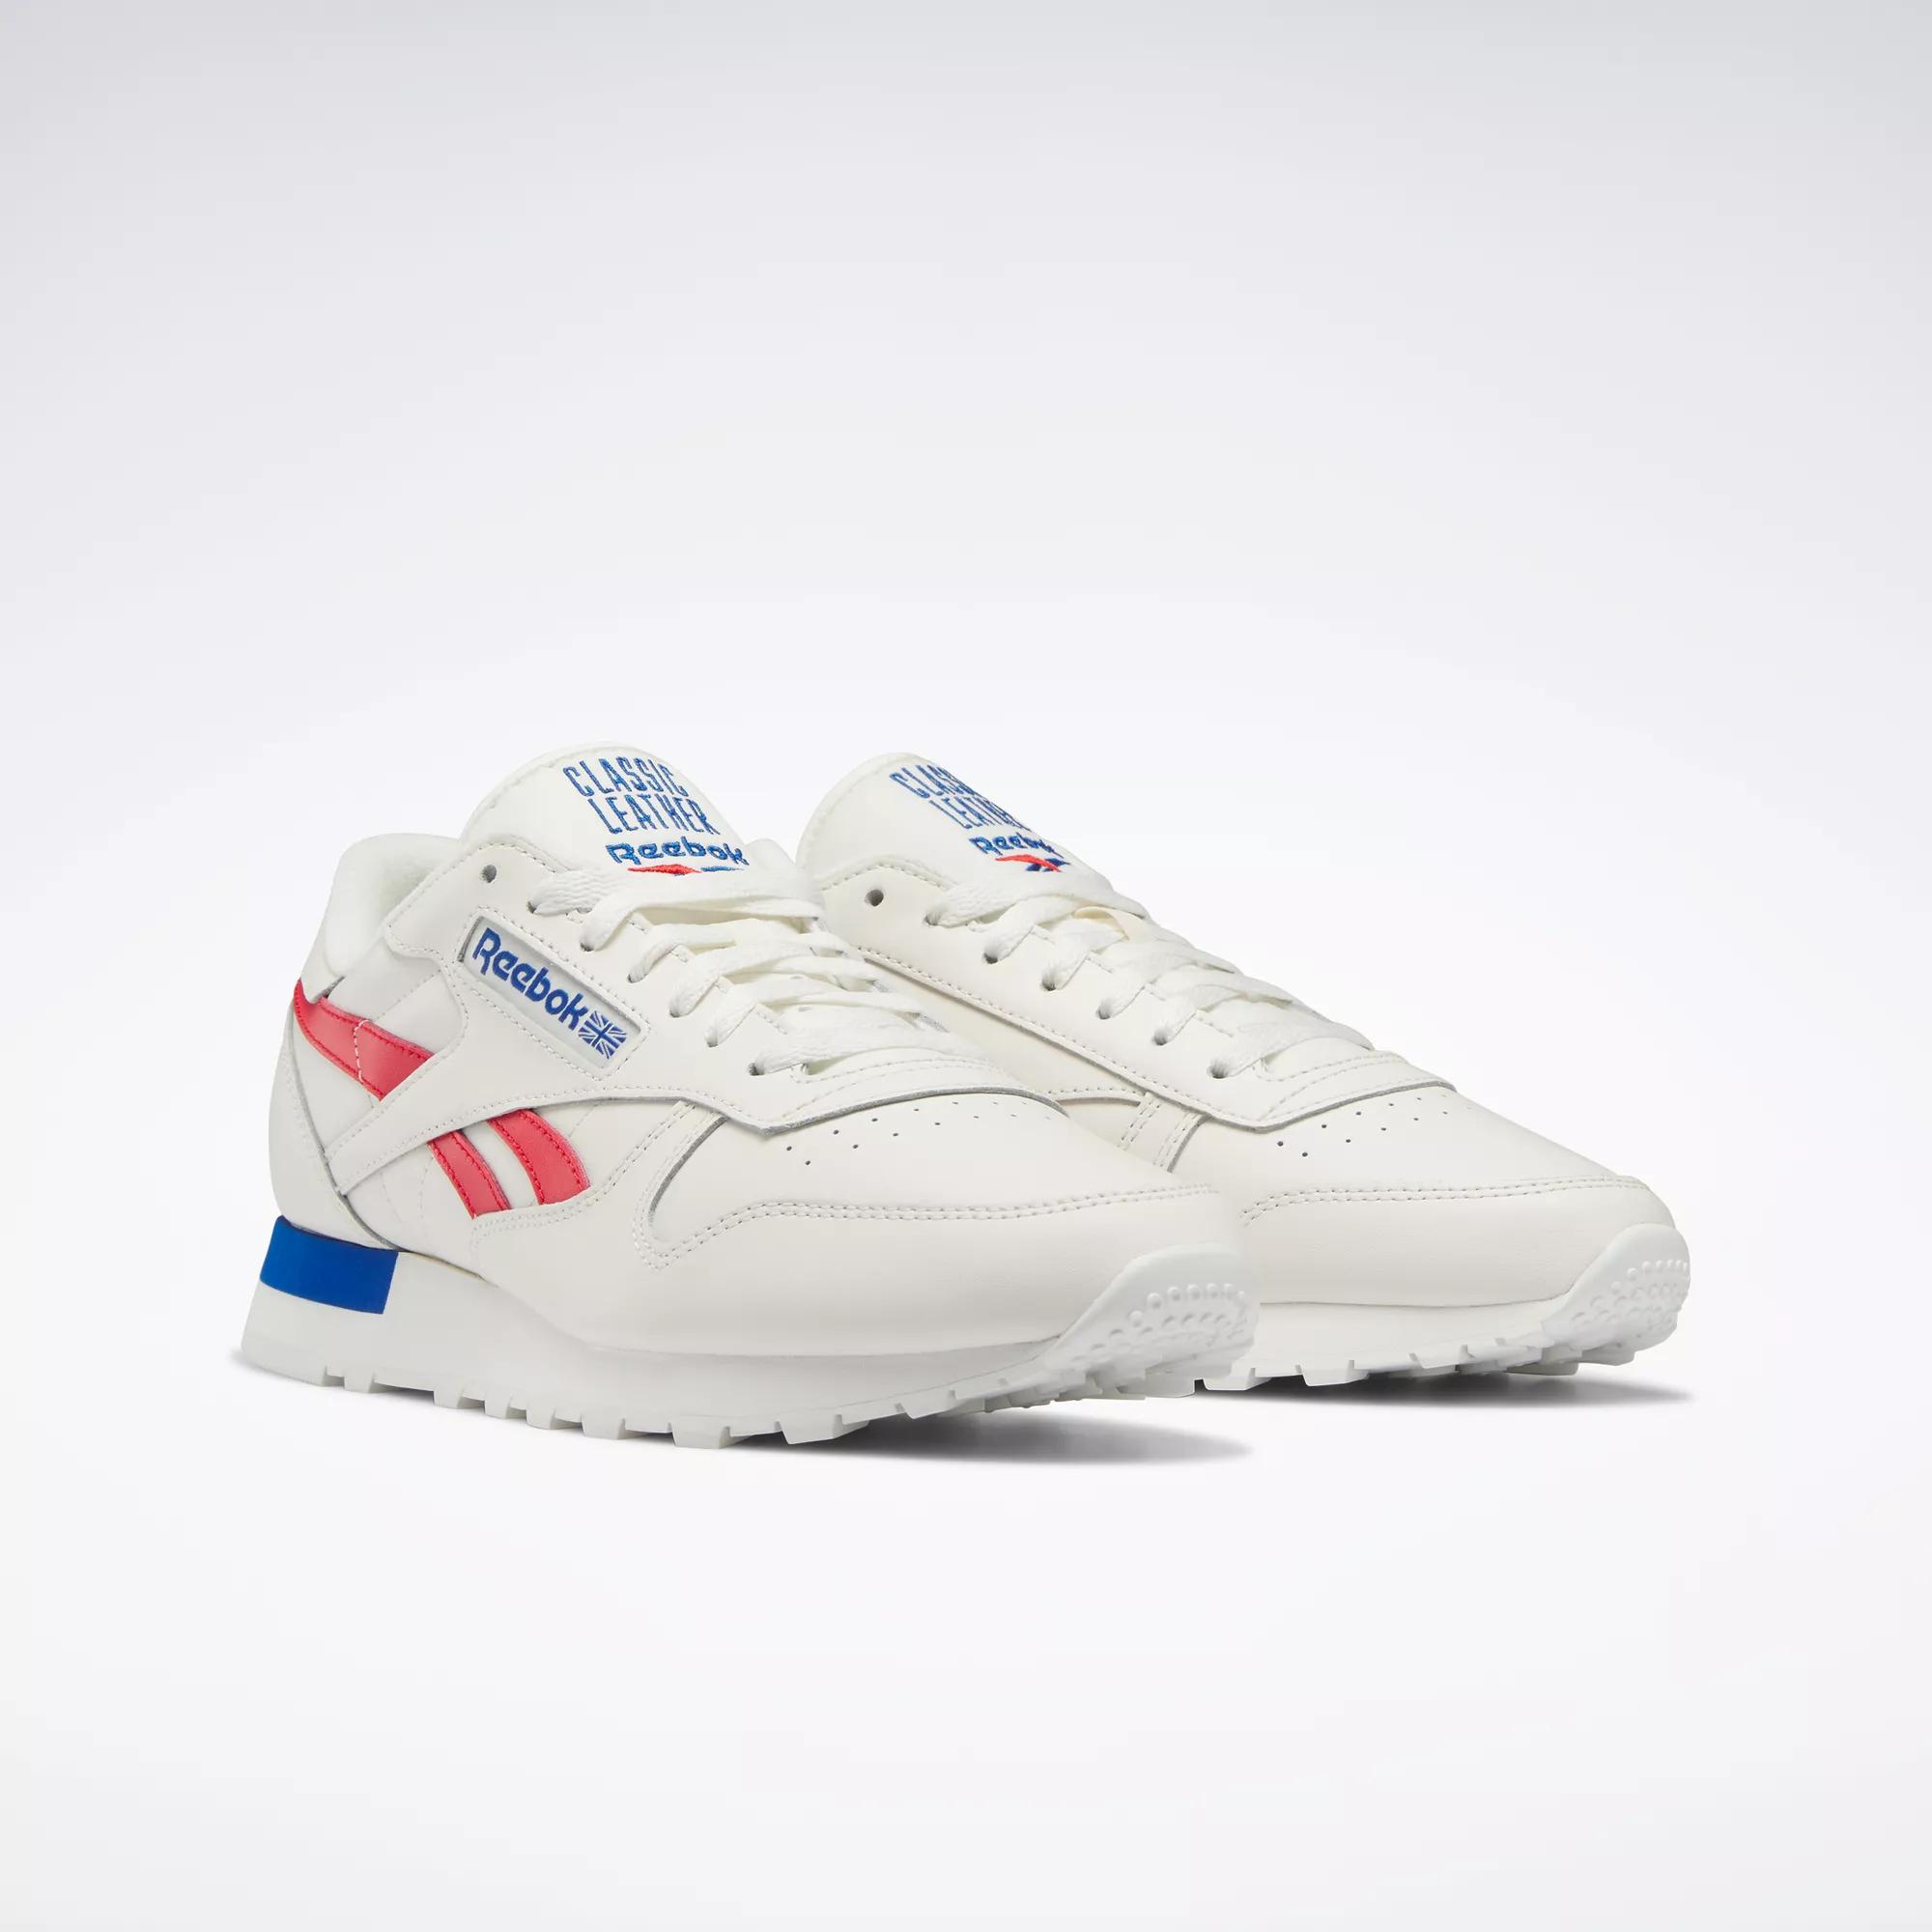 blootstelling Wennen aan Laster Classic Leather Shoes White | Reebok